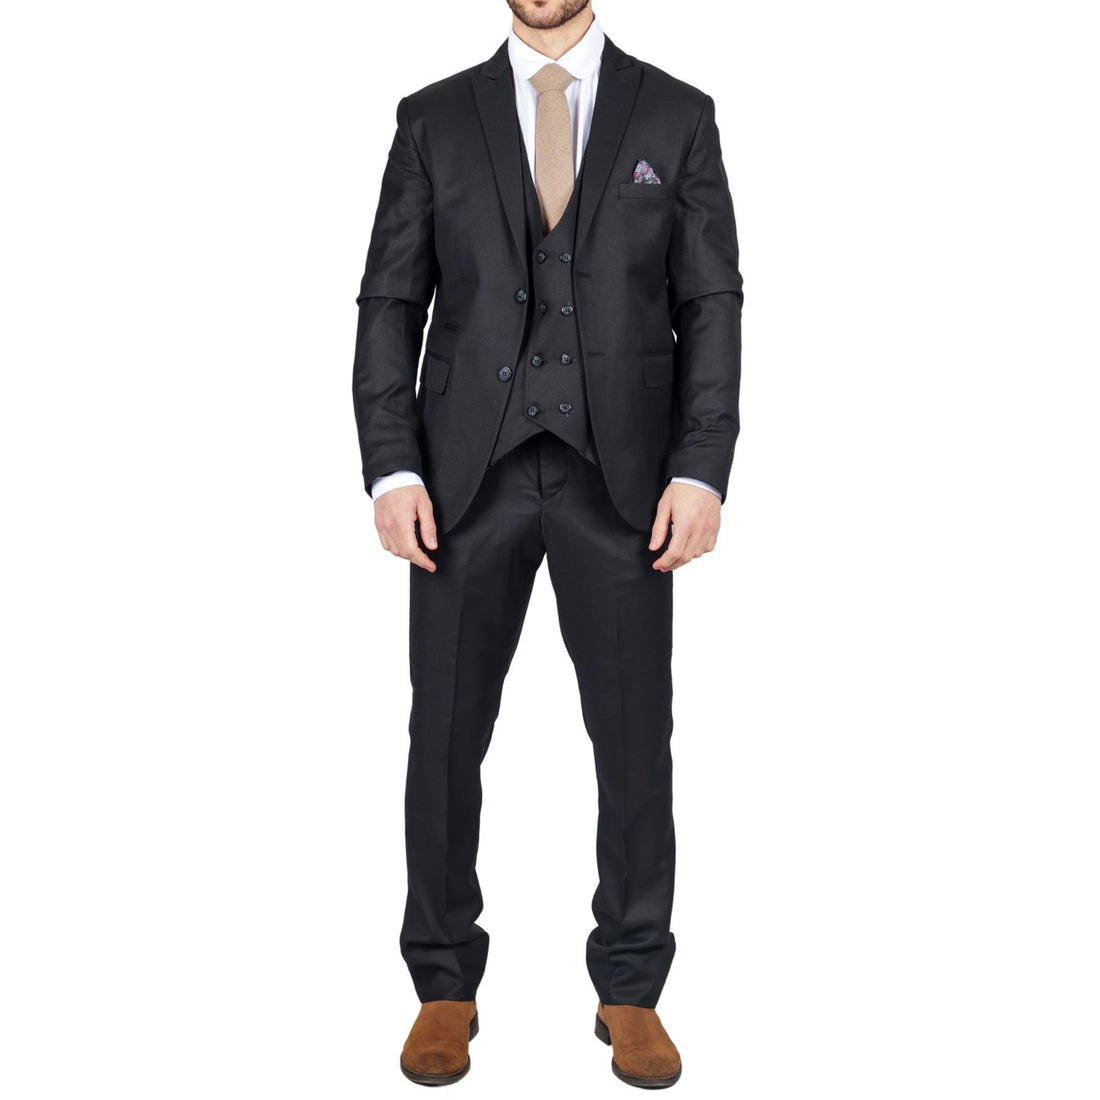 Men's Black Suit Double Breasted 3 Piece Formal Dress